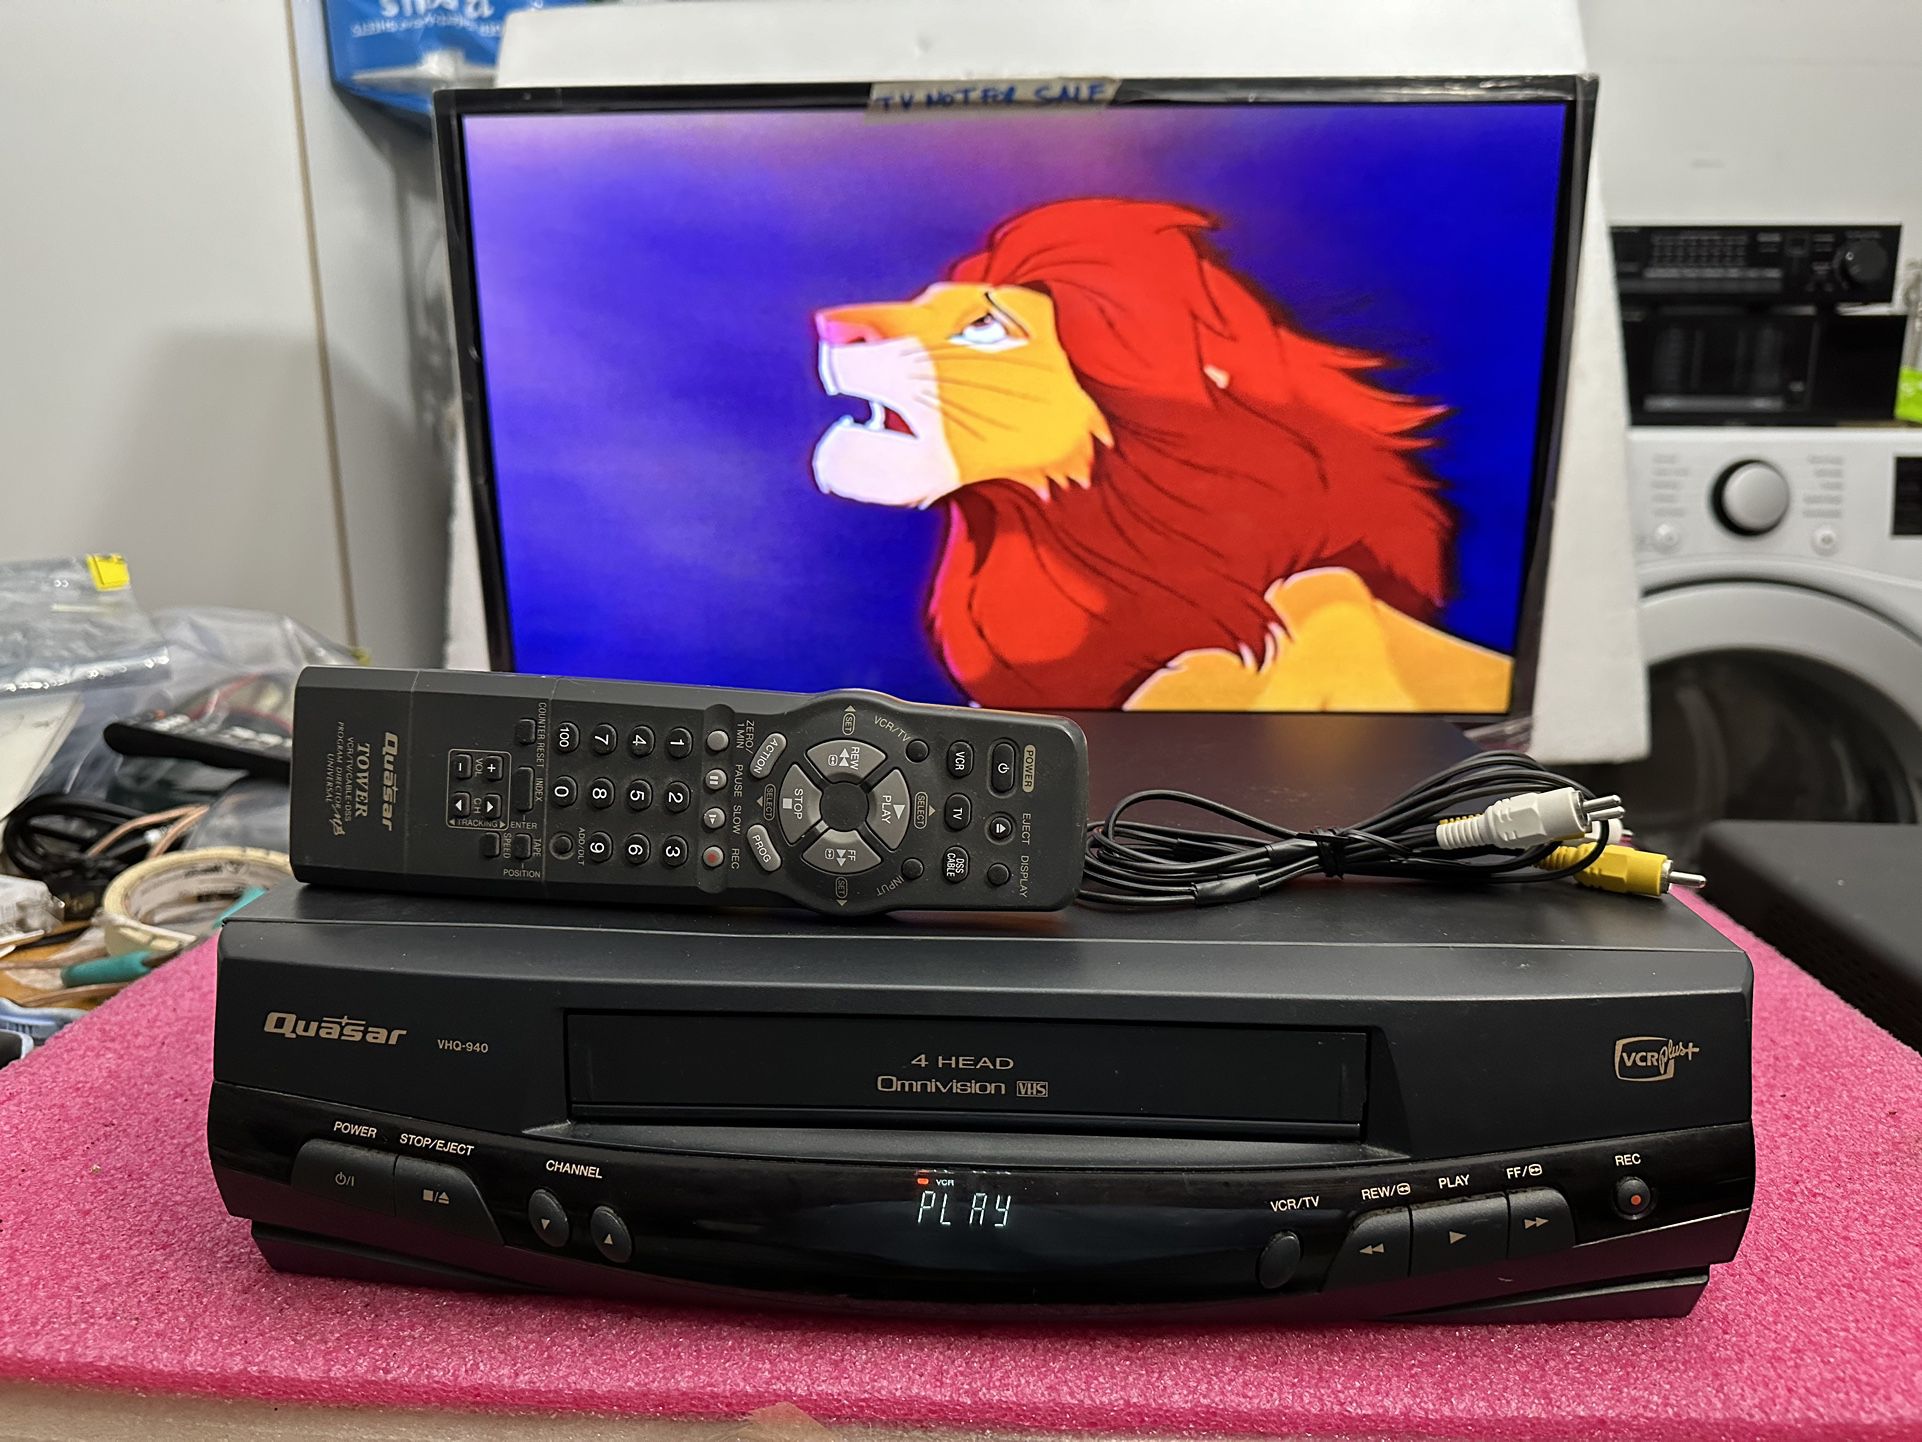 Panasonic Quasar VHQ-940 VCR 4 HEAD OMNIVISION VHS WITH REMOTE AND AV CABLES 